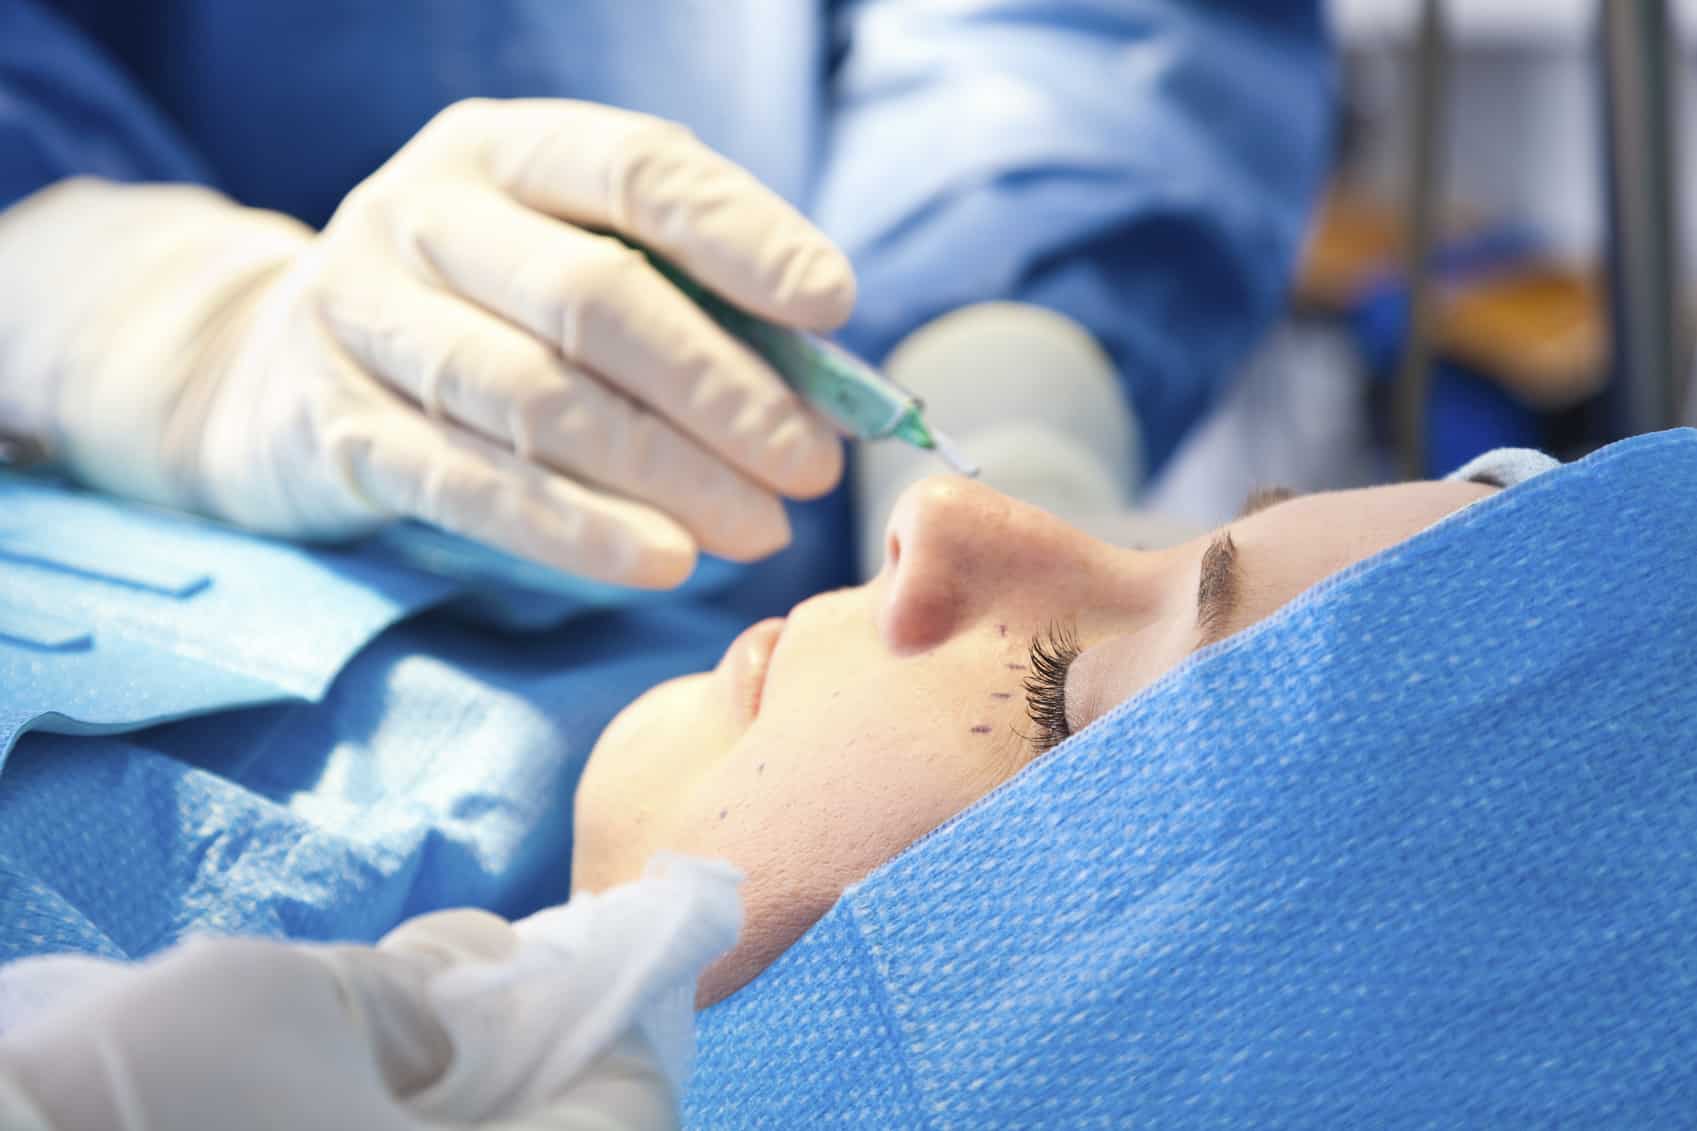 What is blepharoplasty and why is it done